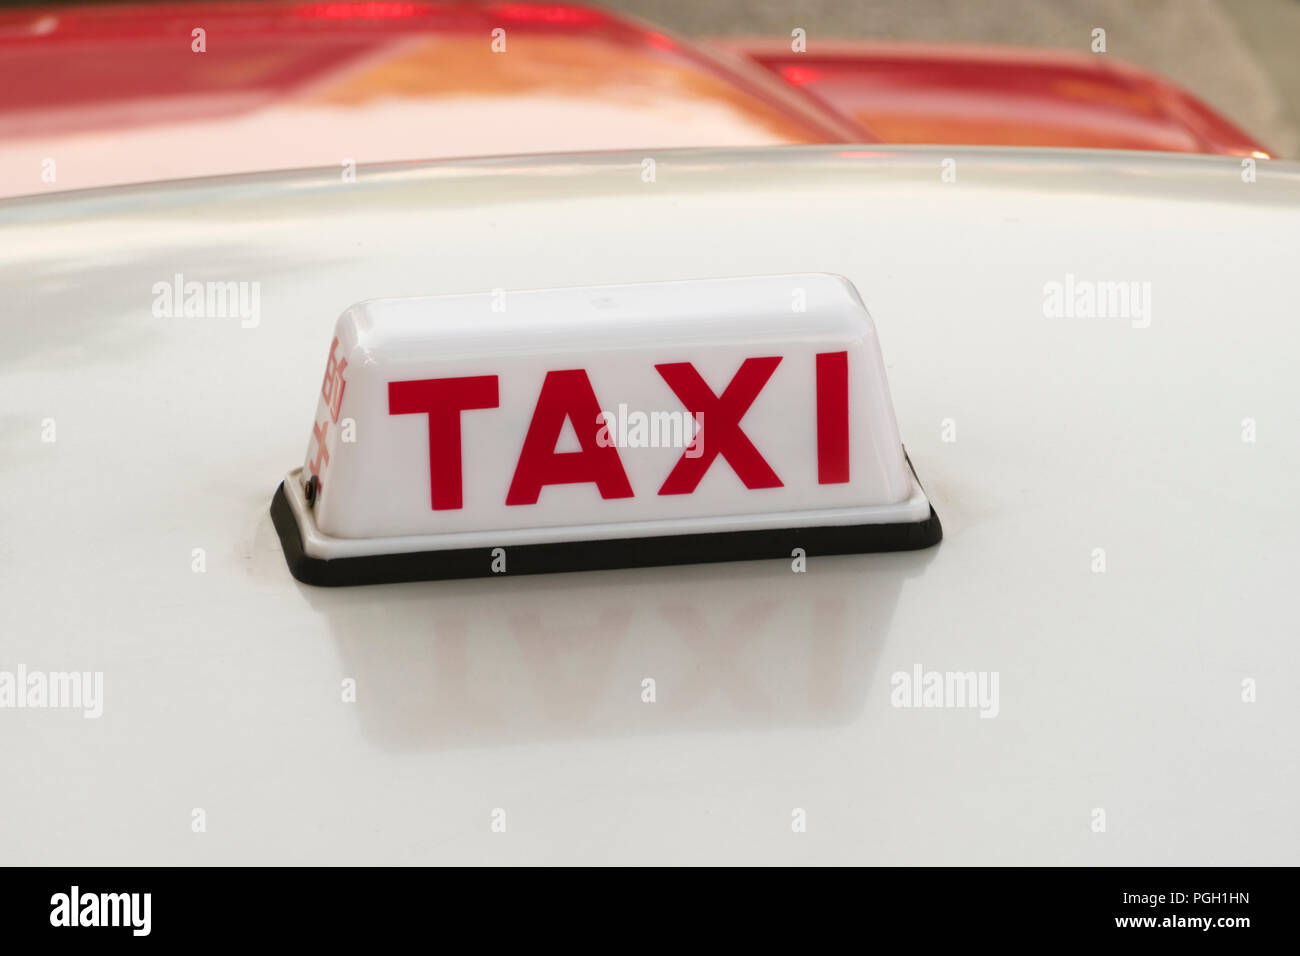 Sign of a taxi in Hong Kong Stock Photo